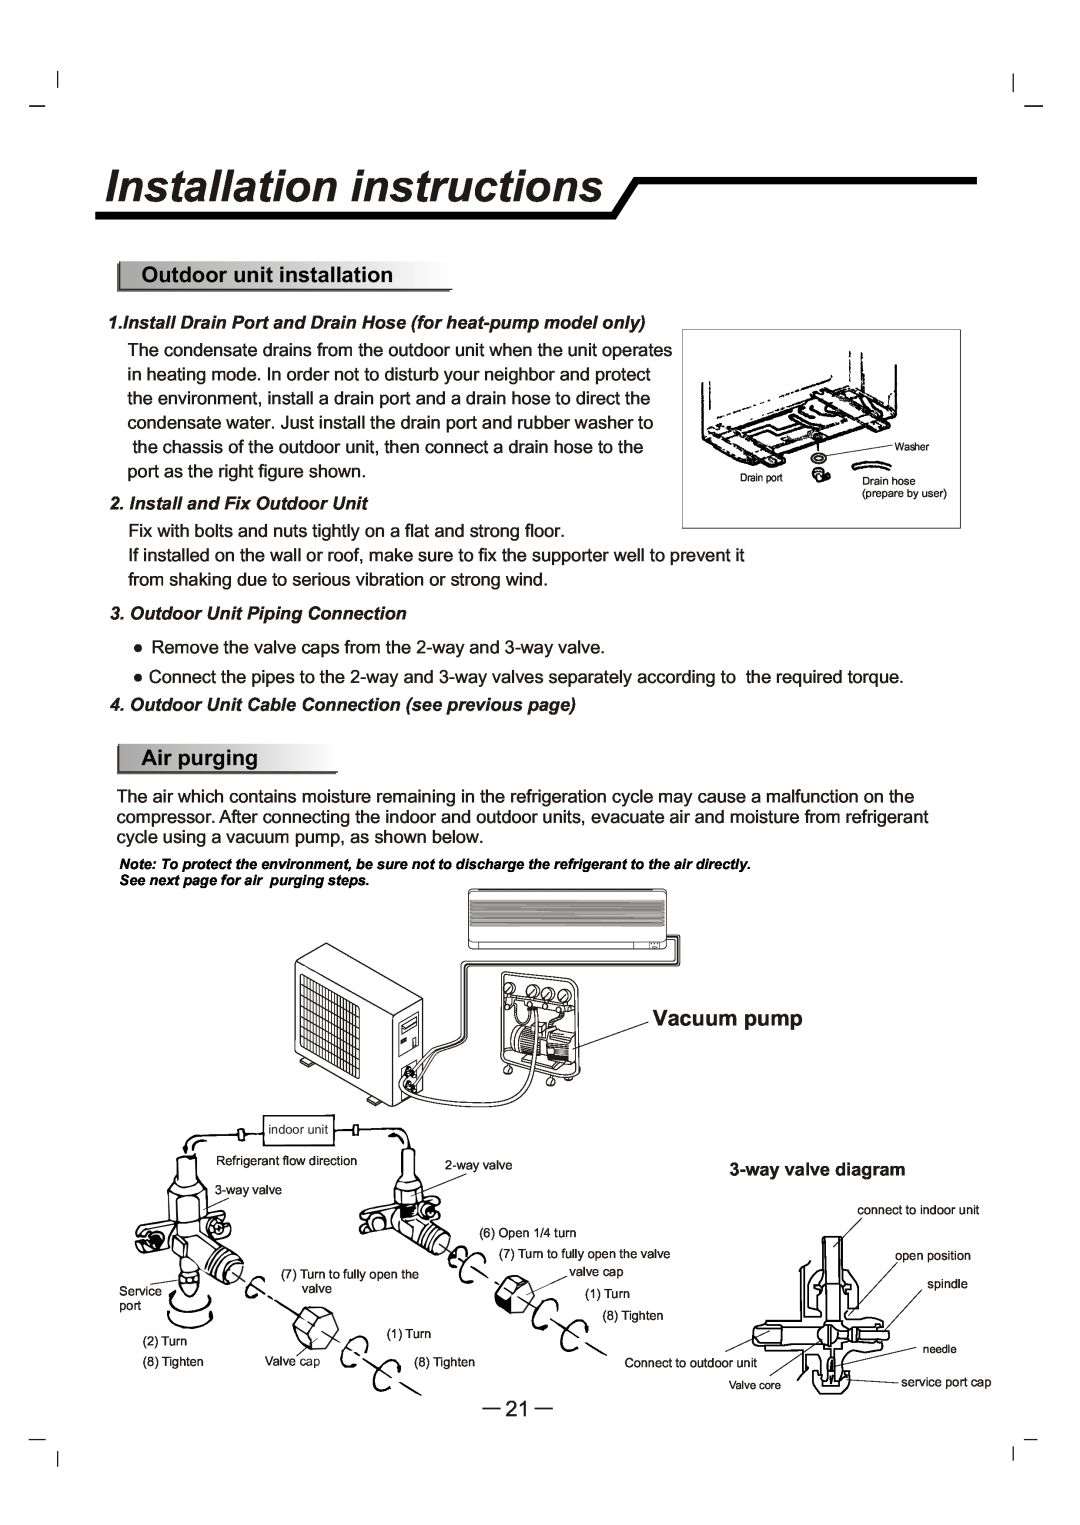 Whirlpool AS12 manual Outdoor unit installation, Air purging, Vacuum pump, Installation instructions 